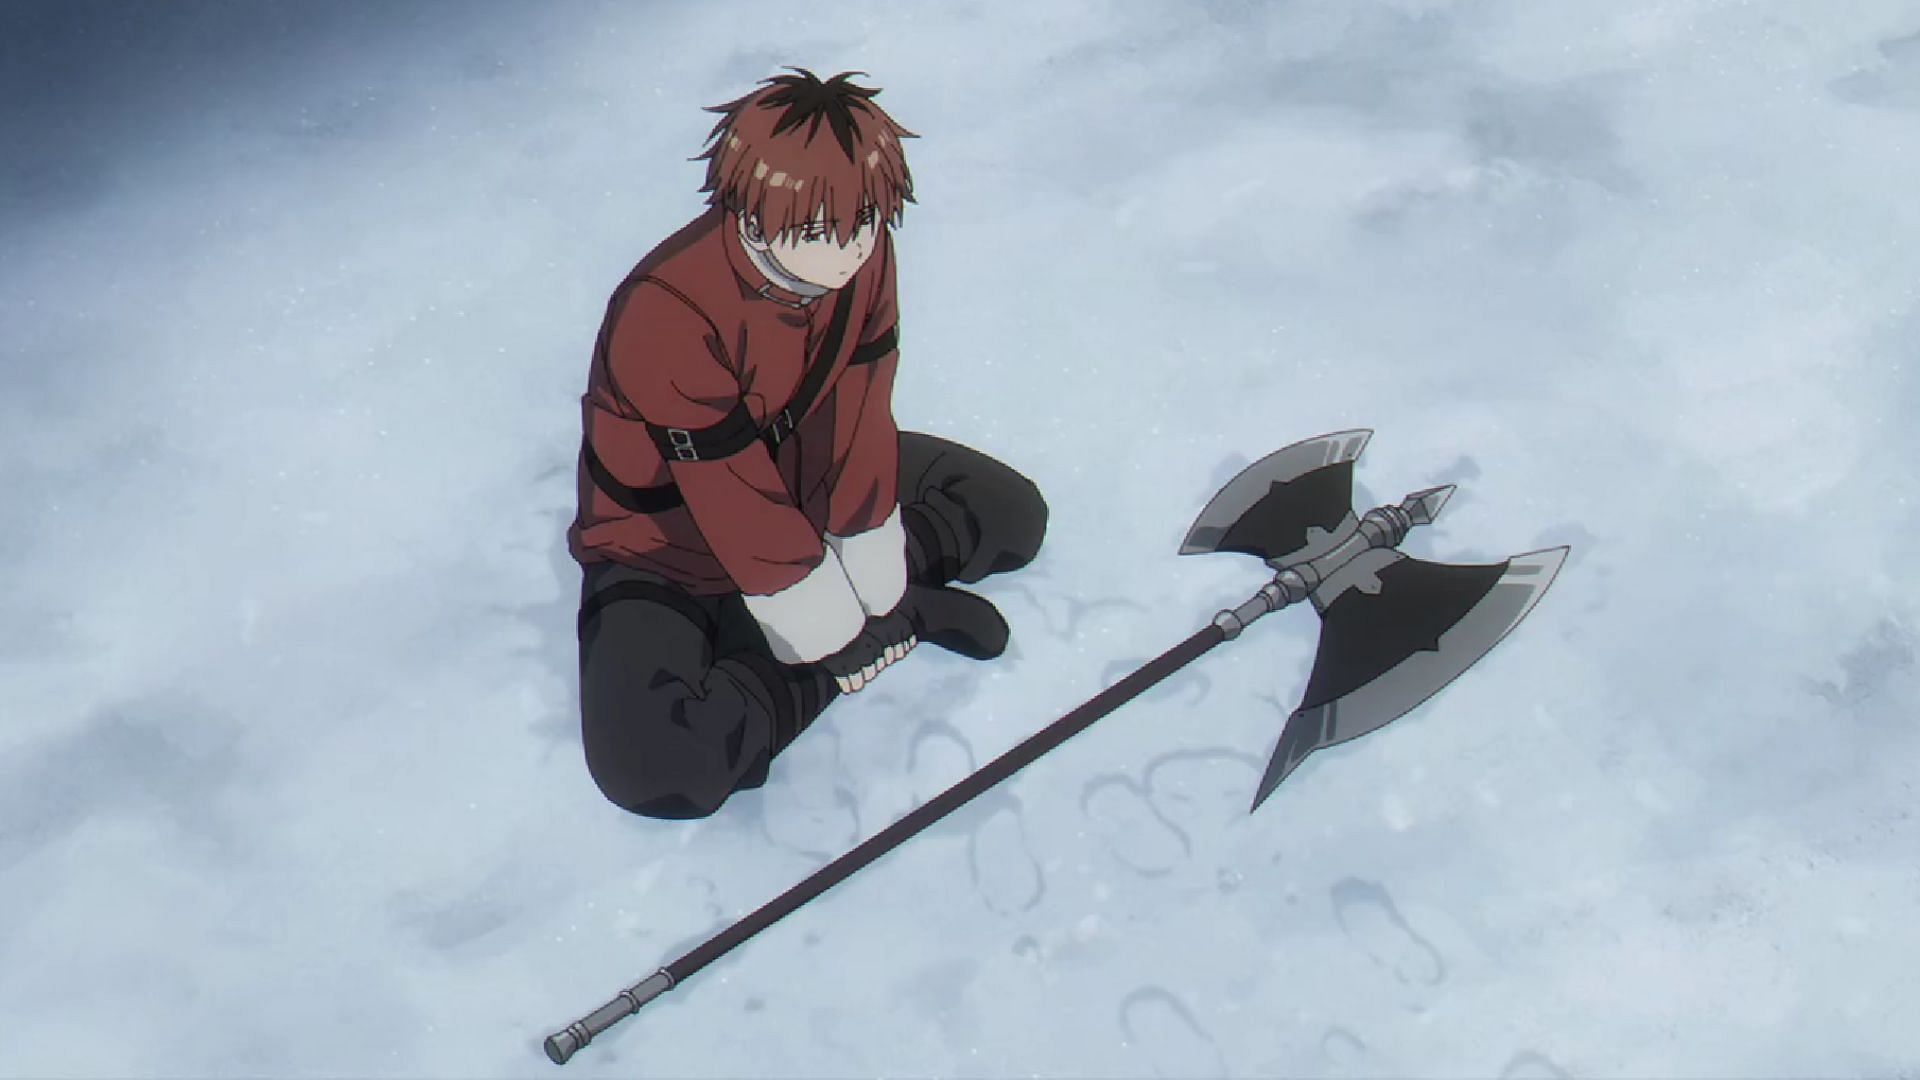 Stark after defeating the ruler as shown in the anime (Image via Studio MADHOUSE)